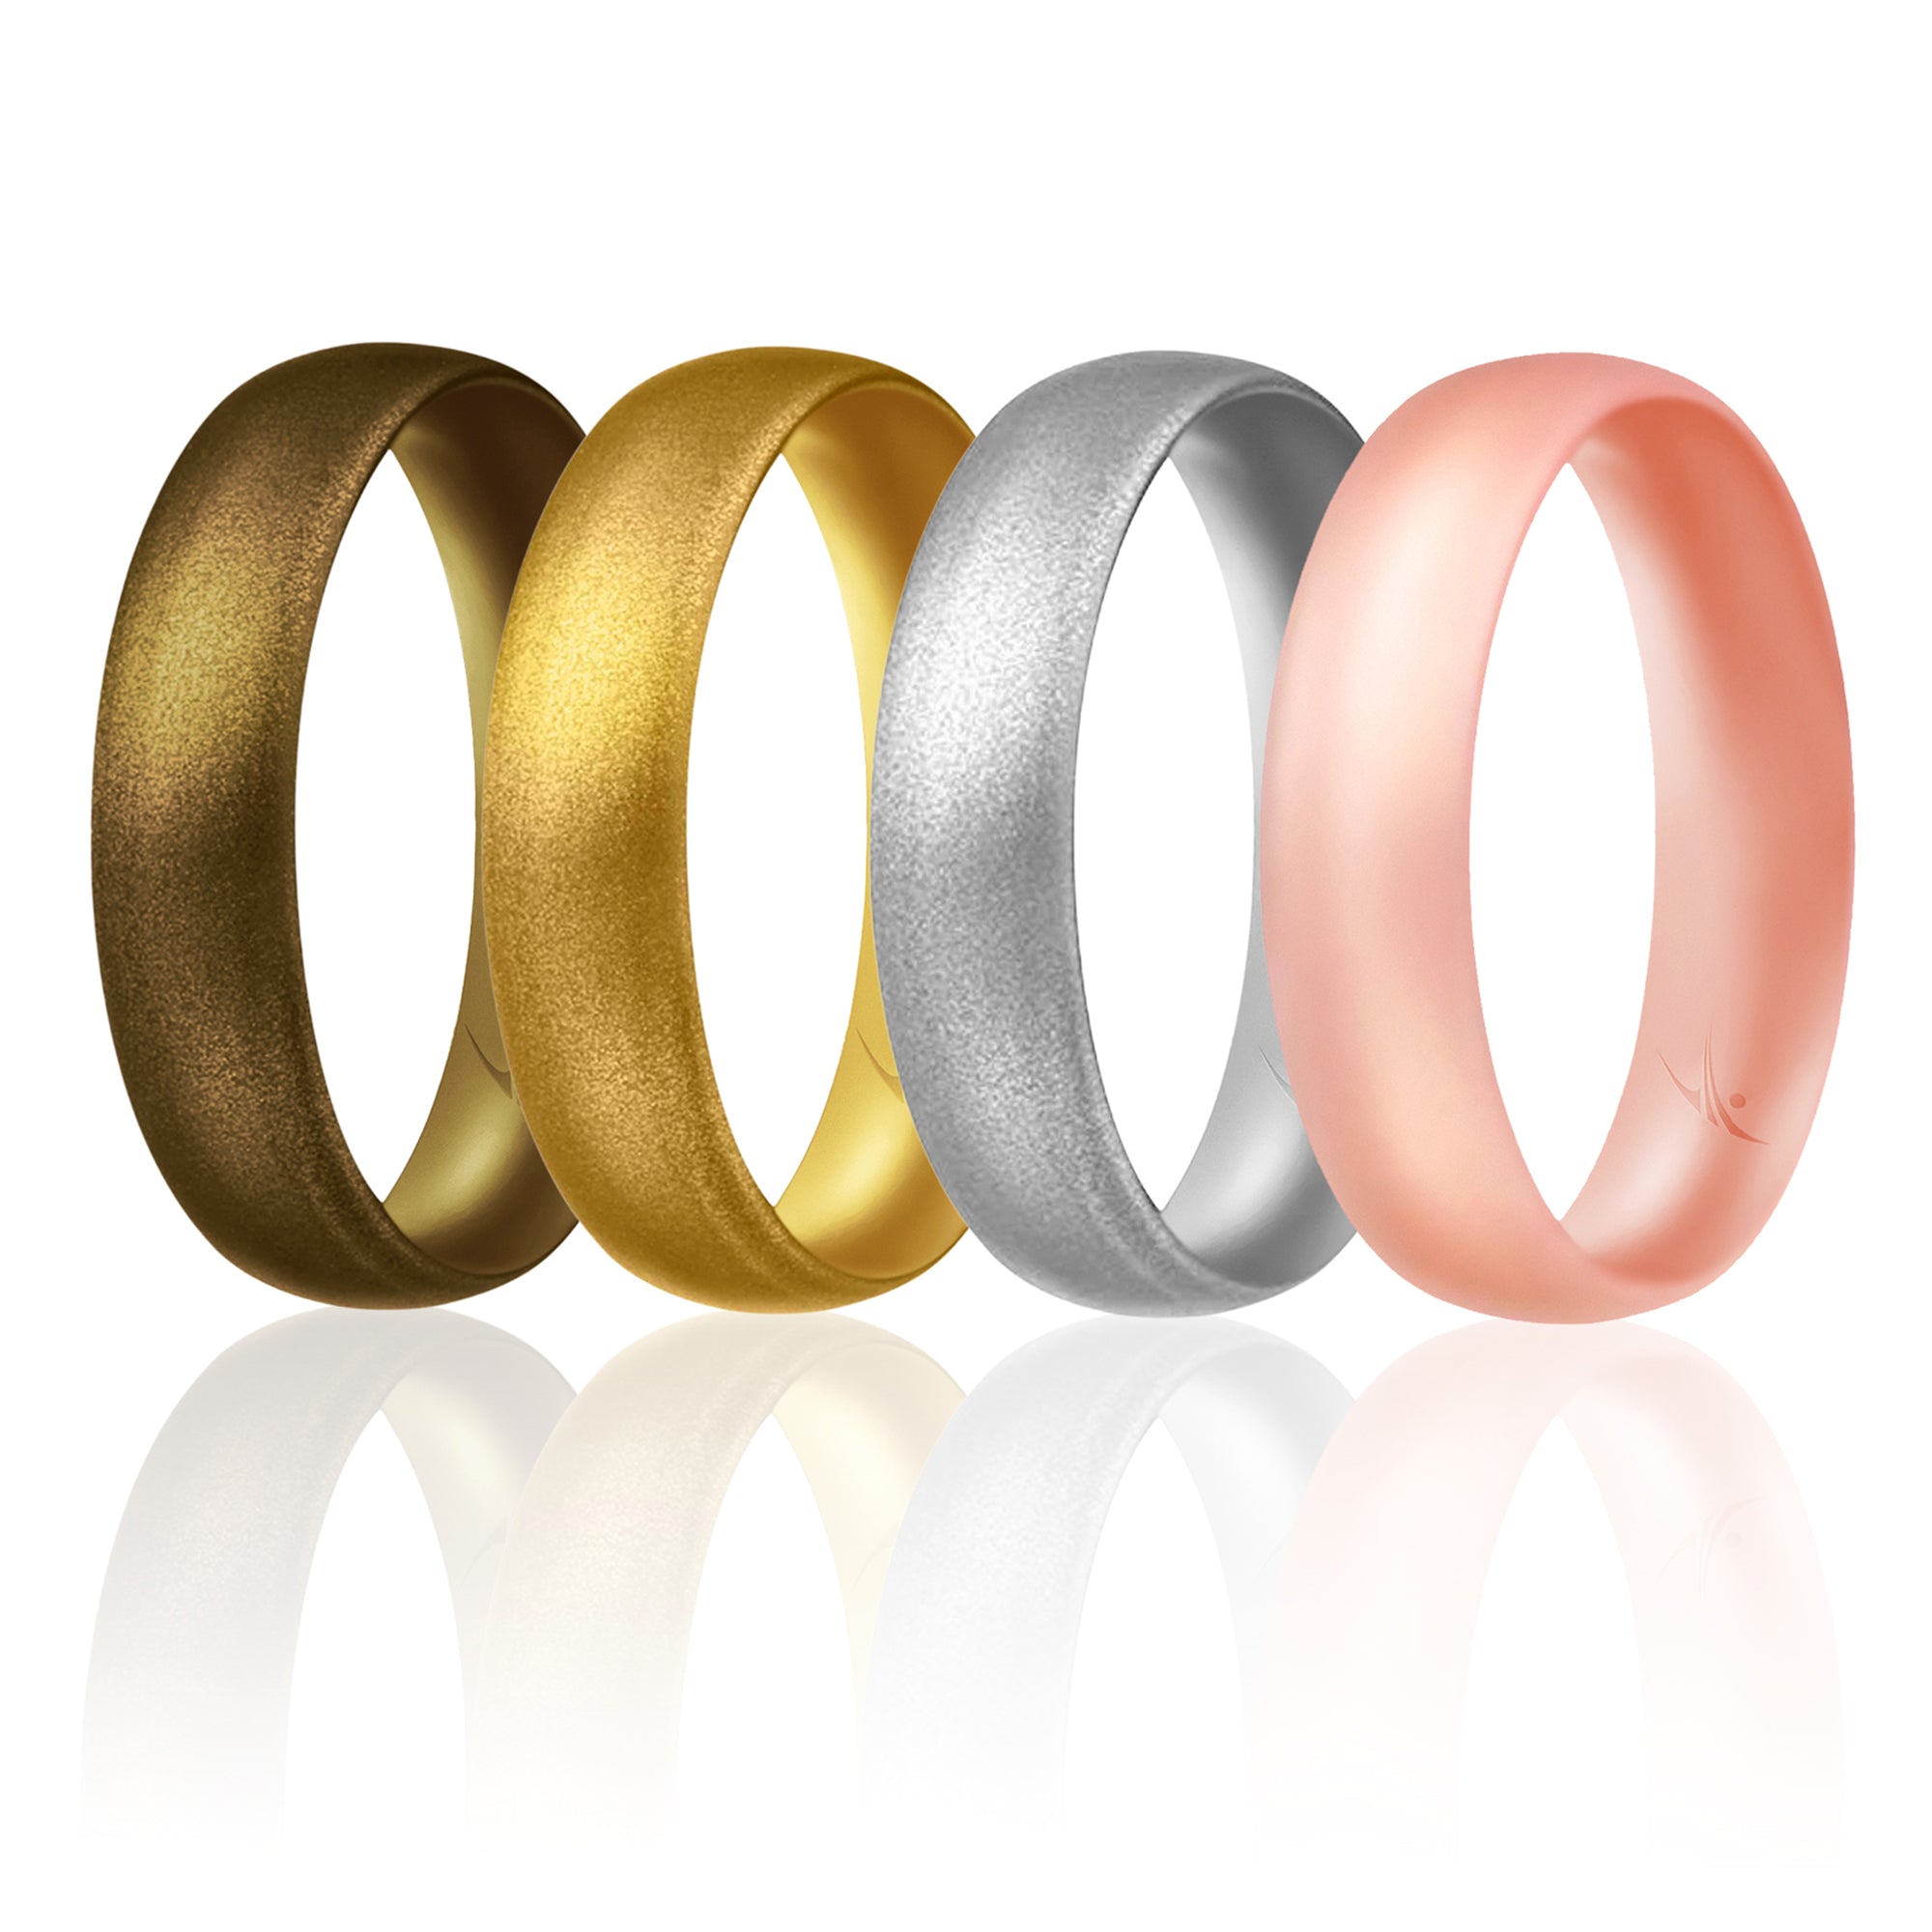 Silicone Wedding Ring - Dome Style Thin Comfort Fit Set by ROQ for Women - 11 mm Bronze, Gold, Silver, Rose Gold